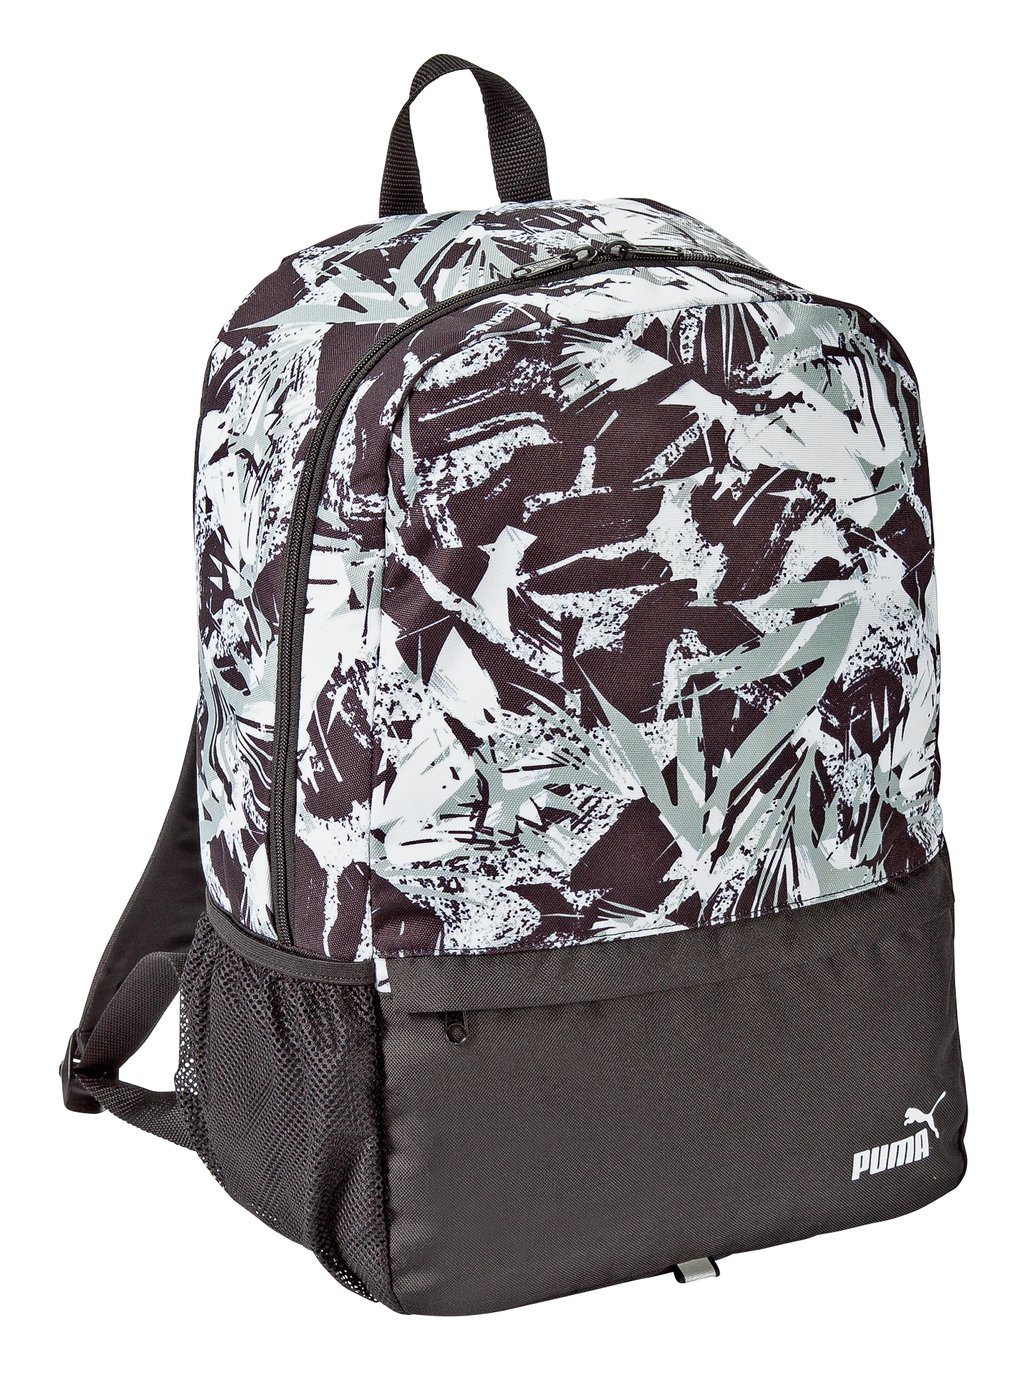 Puma Backpack and Pencil case - Black